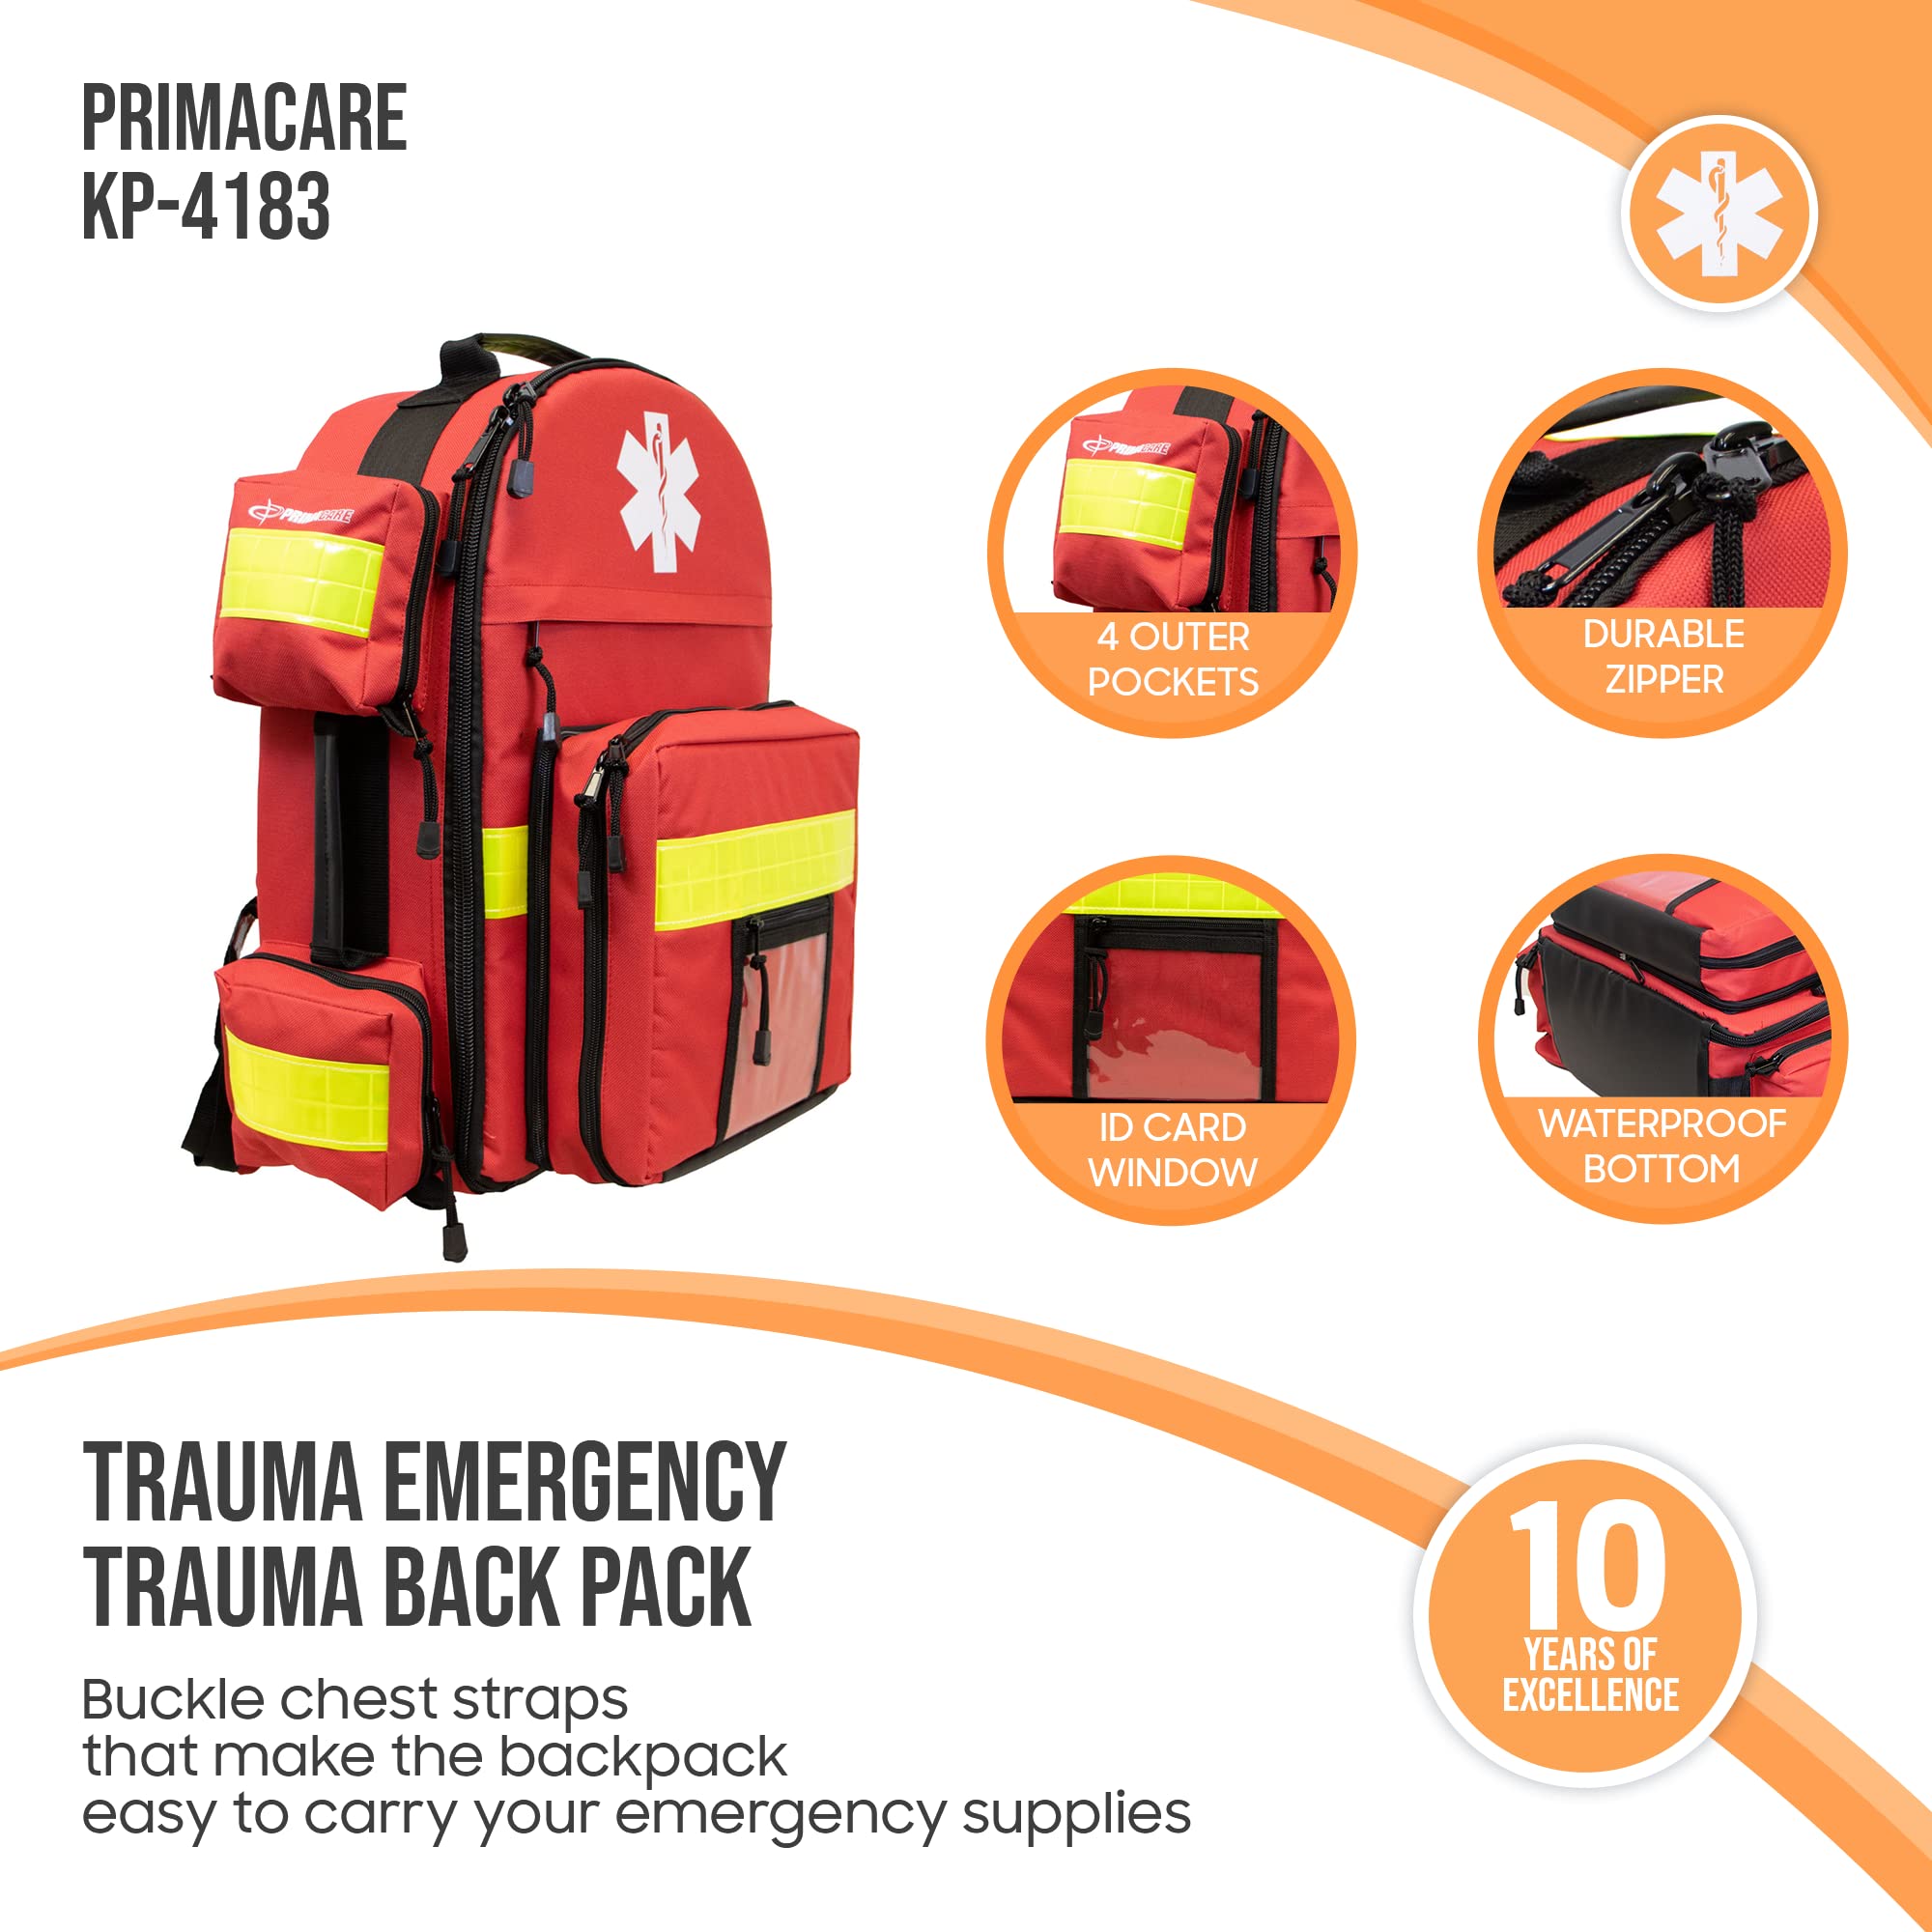 Primacare KP-4183 Trauma Emergency Medical Supplies Tactical 17